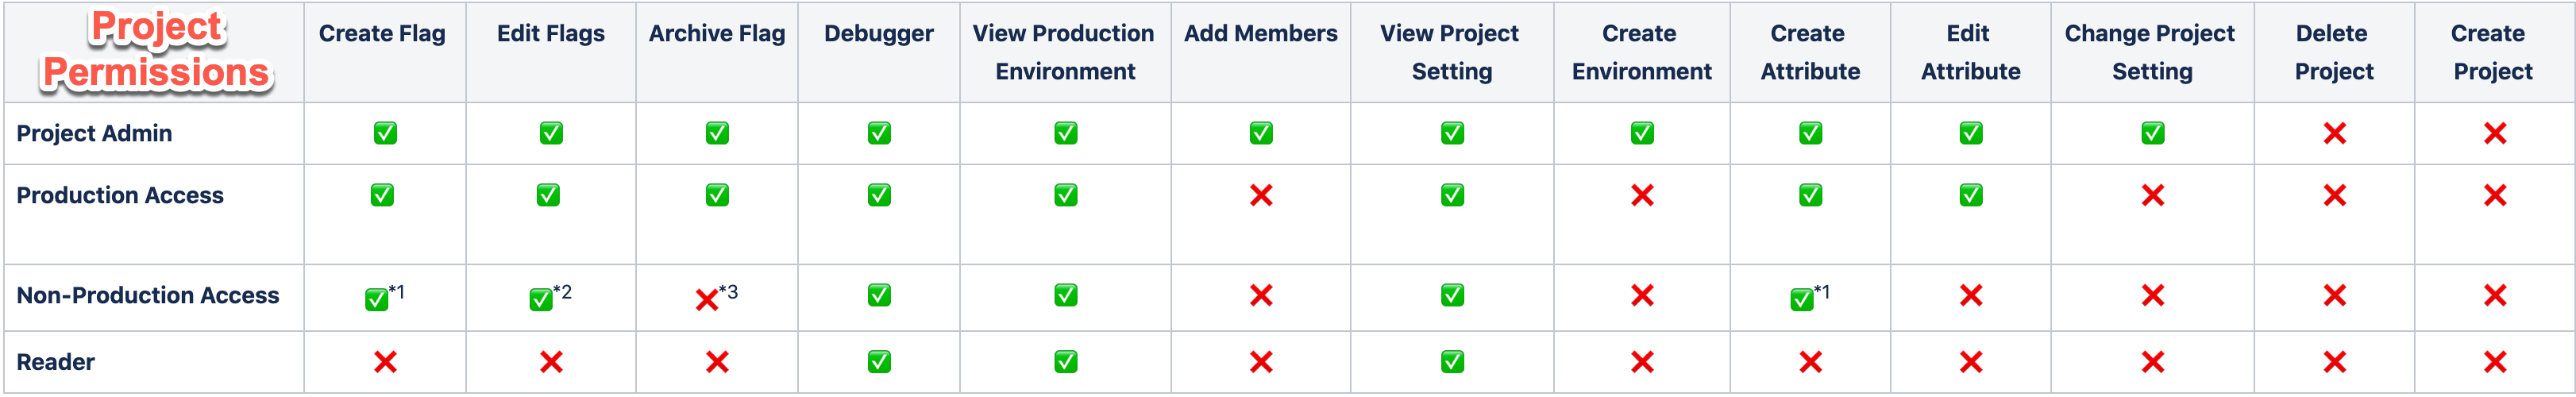 project permissions table